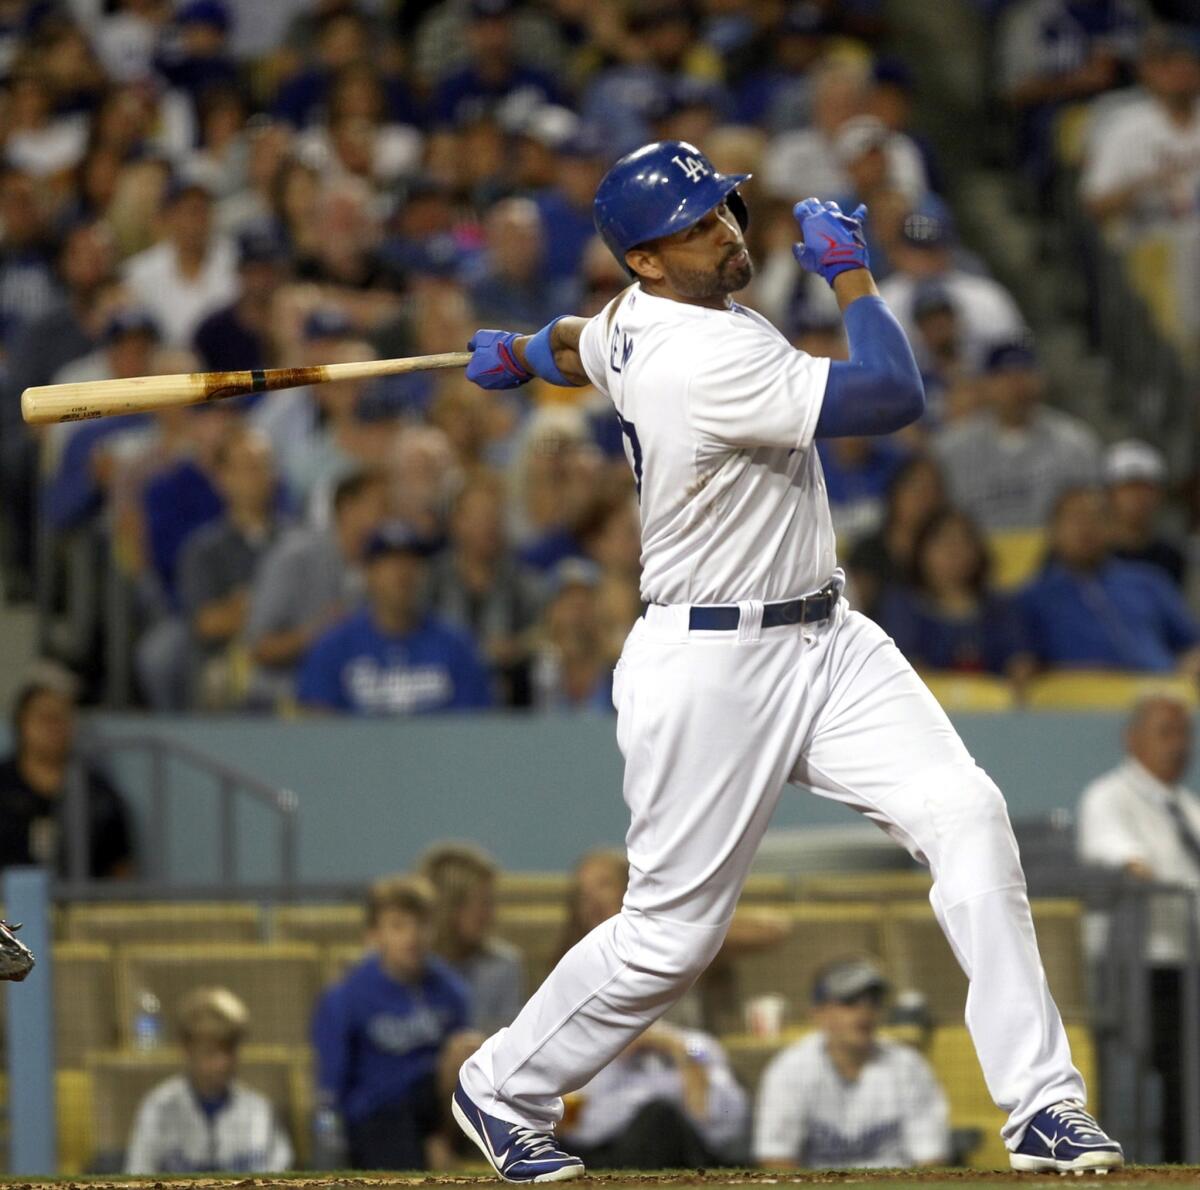 Dodgers outfielder Matt Kemp has missed 81 games this season because of injury.